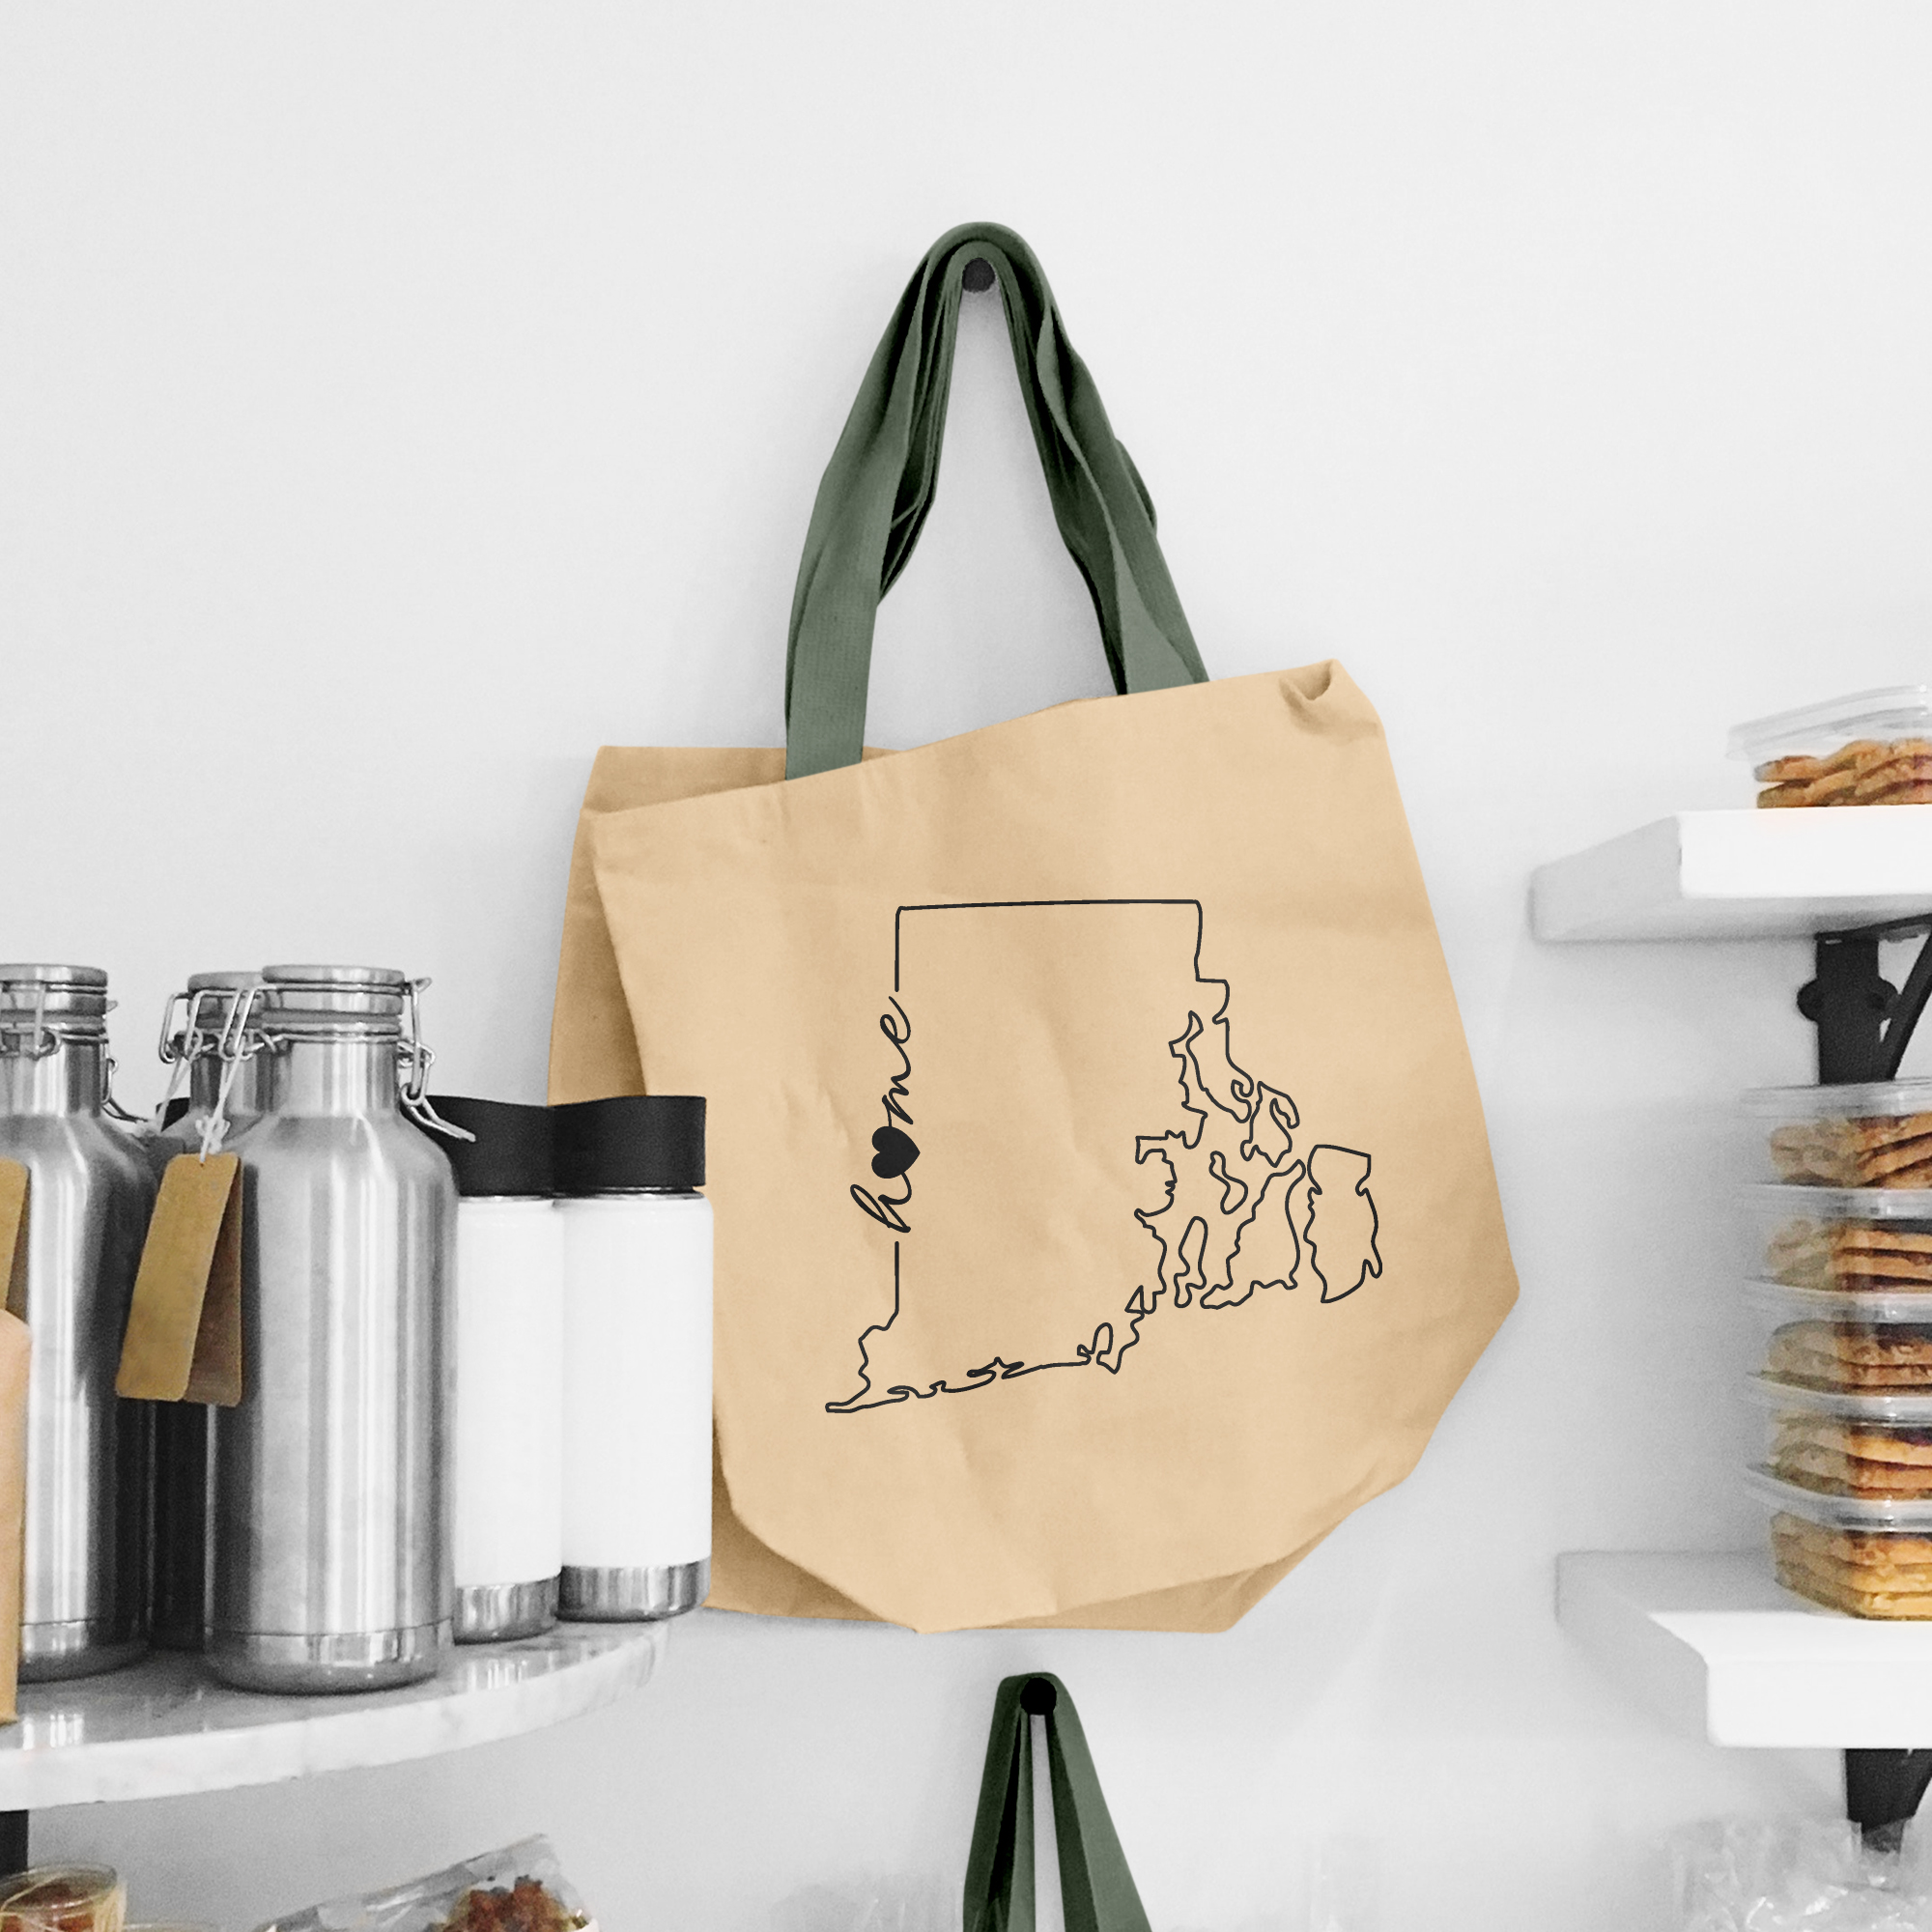 Black illustration of map of Rhode Island on the beige shopping bag with dirty green handle.